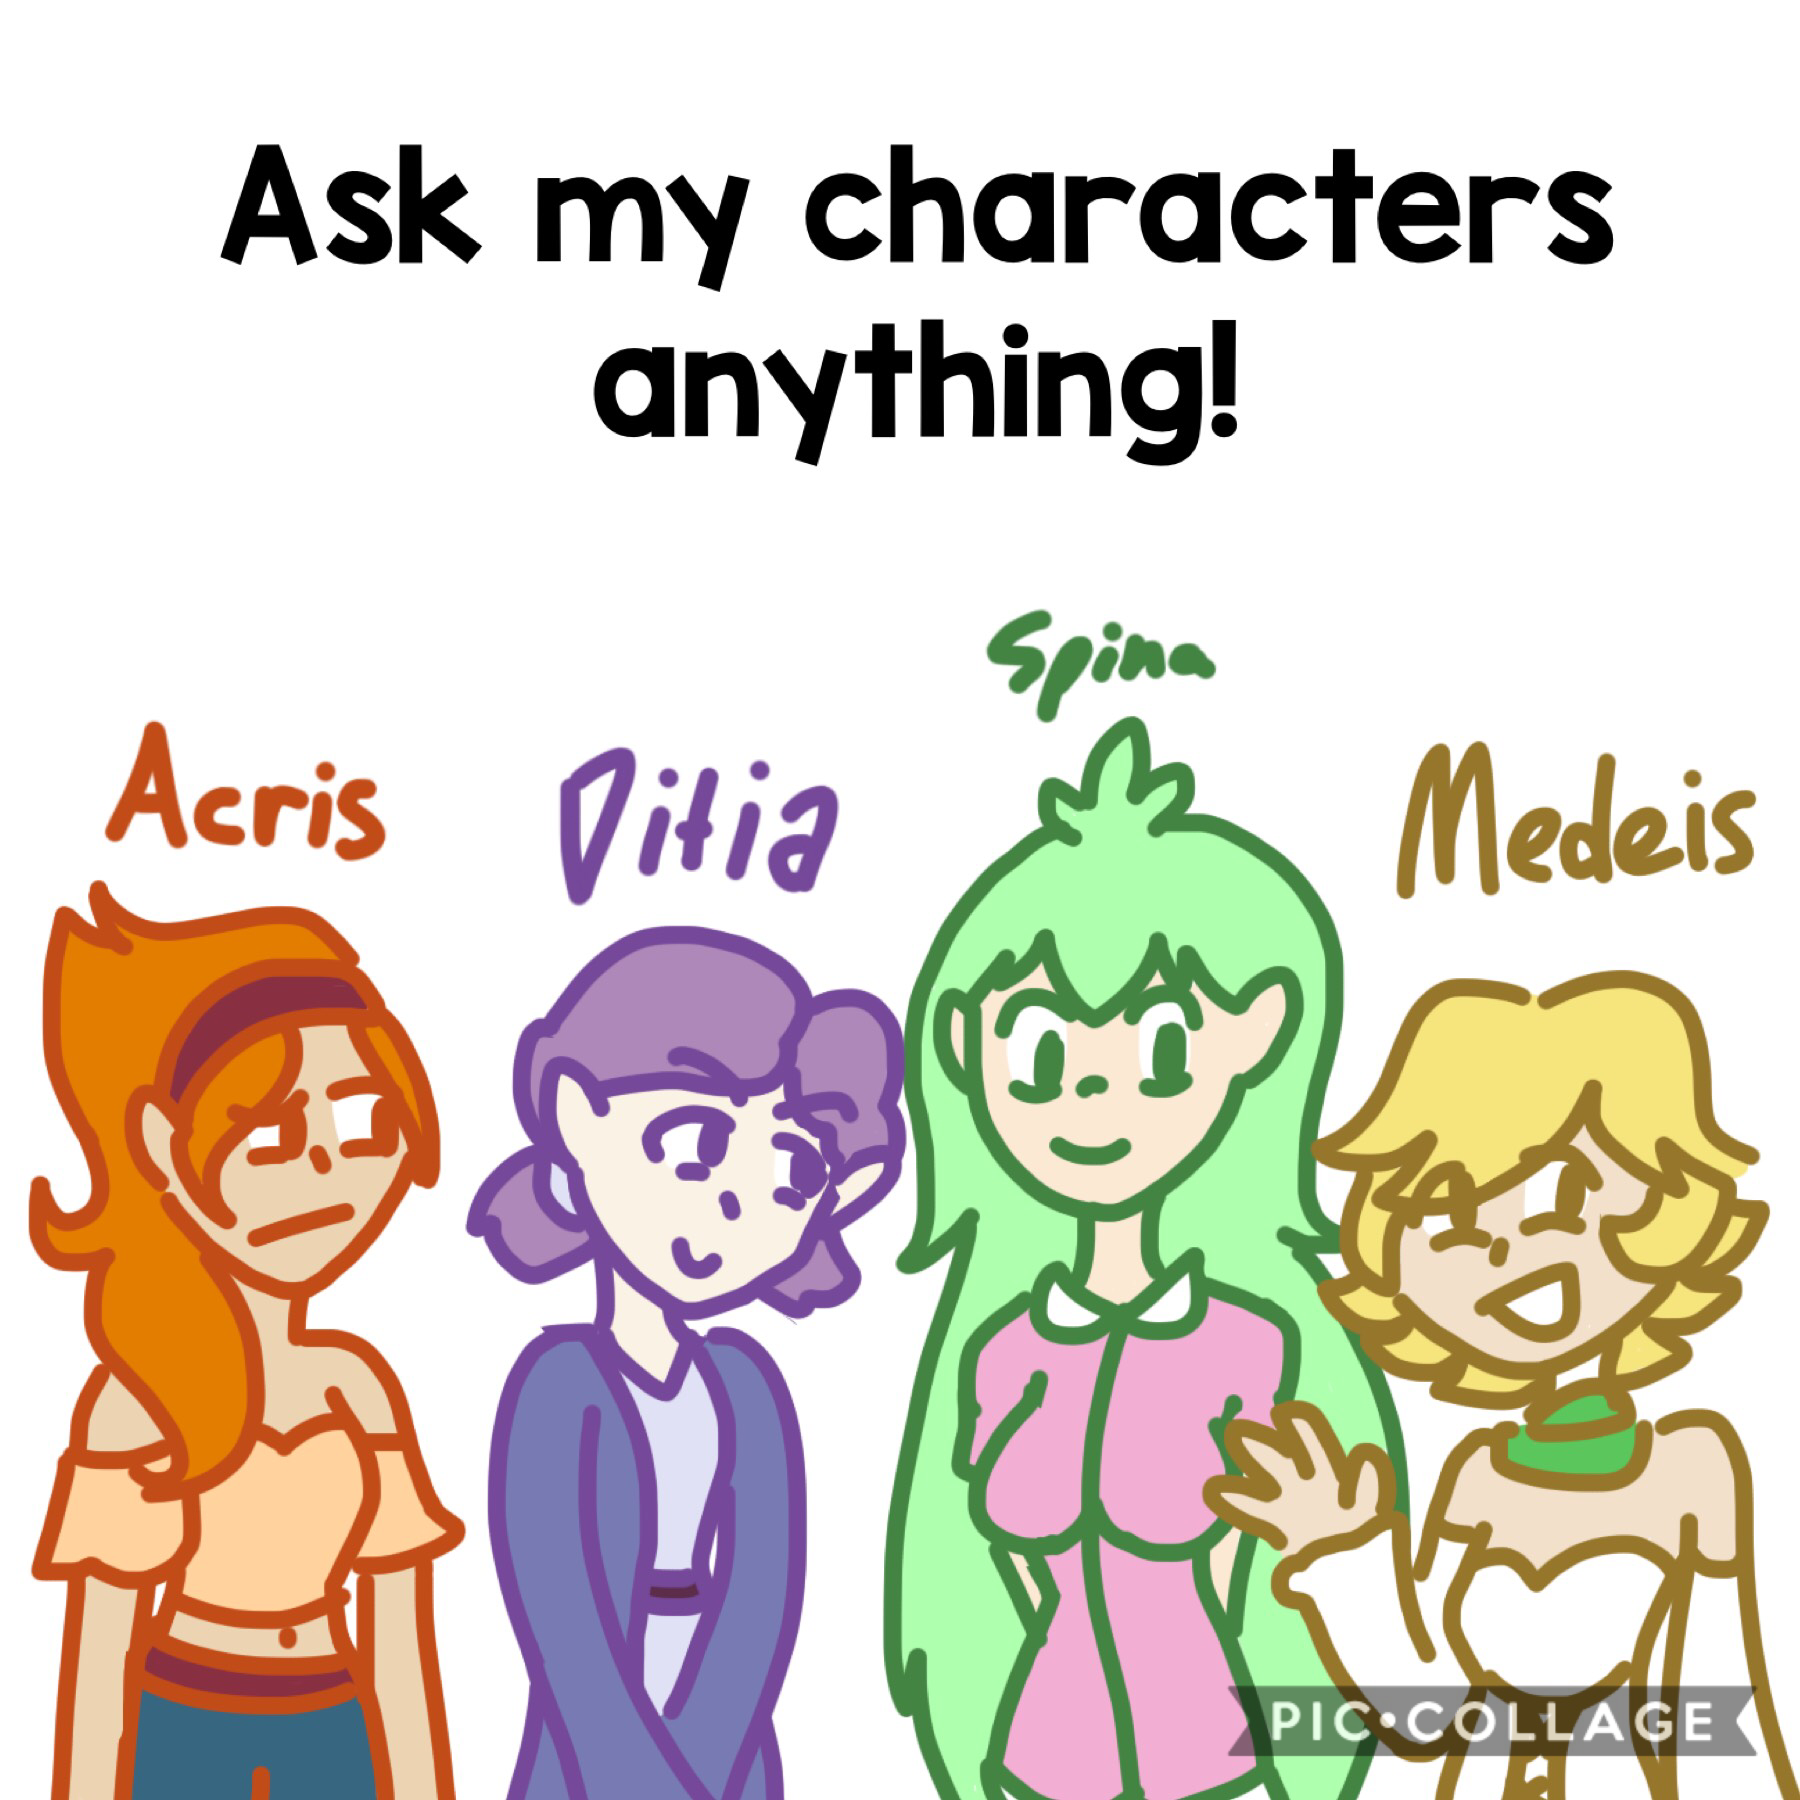 Ask them stuff, and i’ll quick doodle answers!